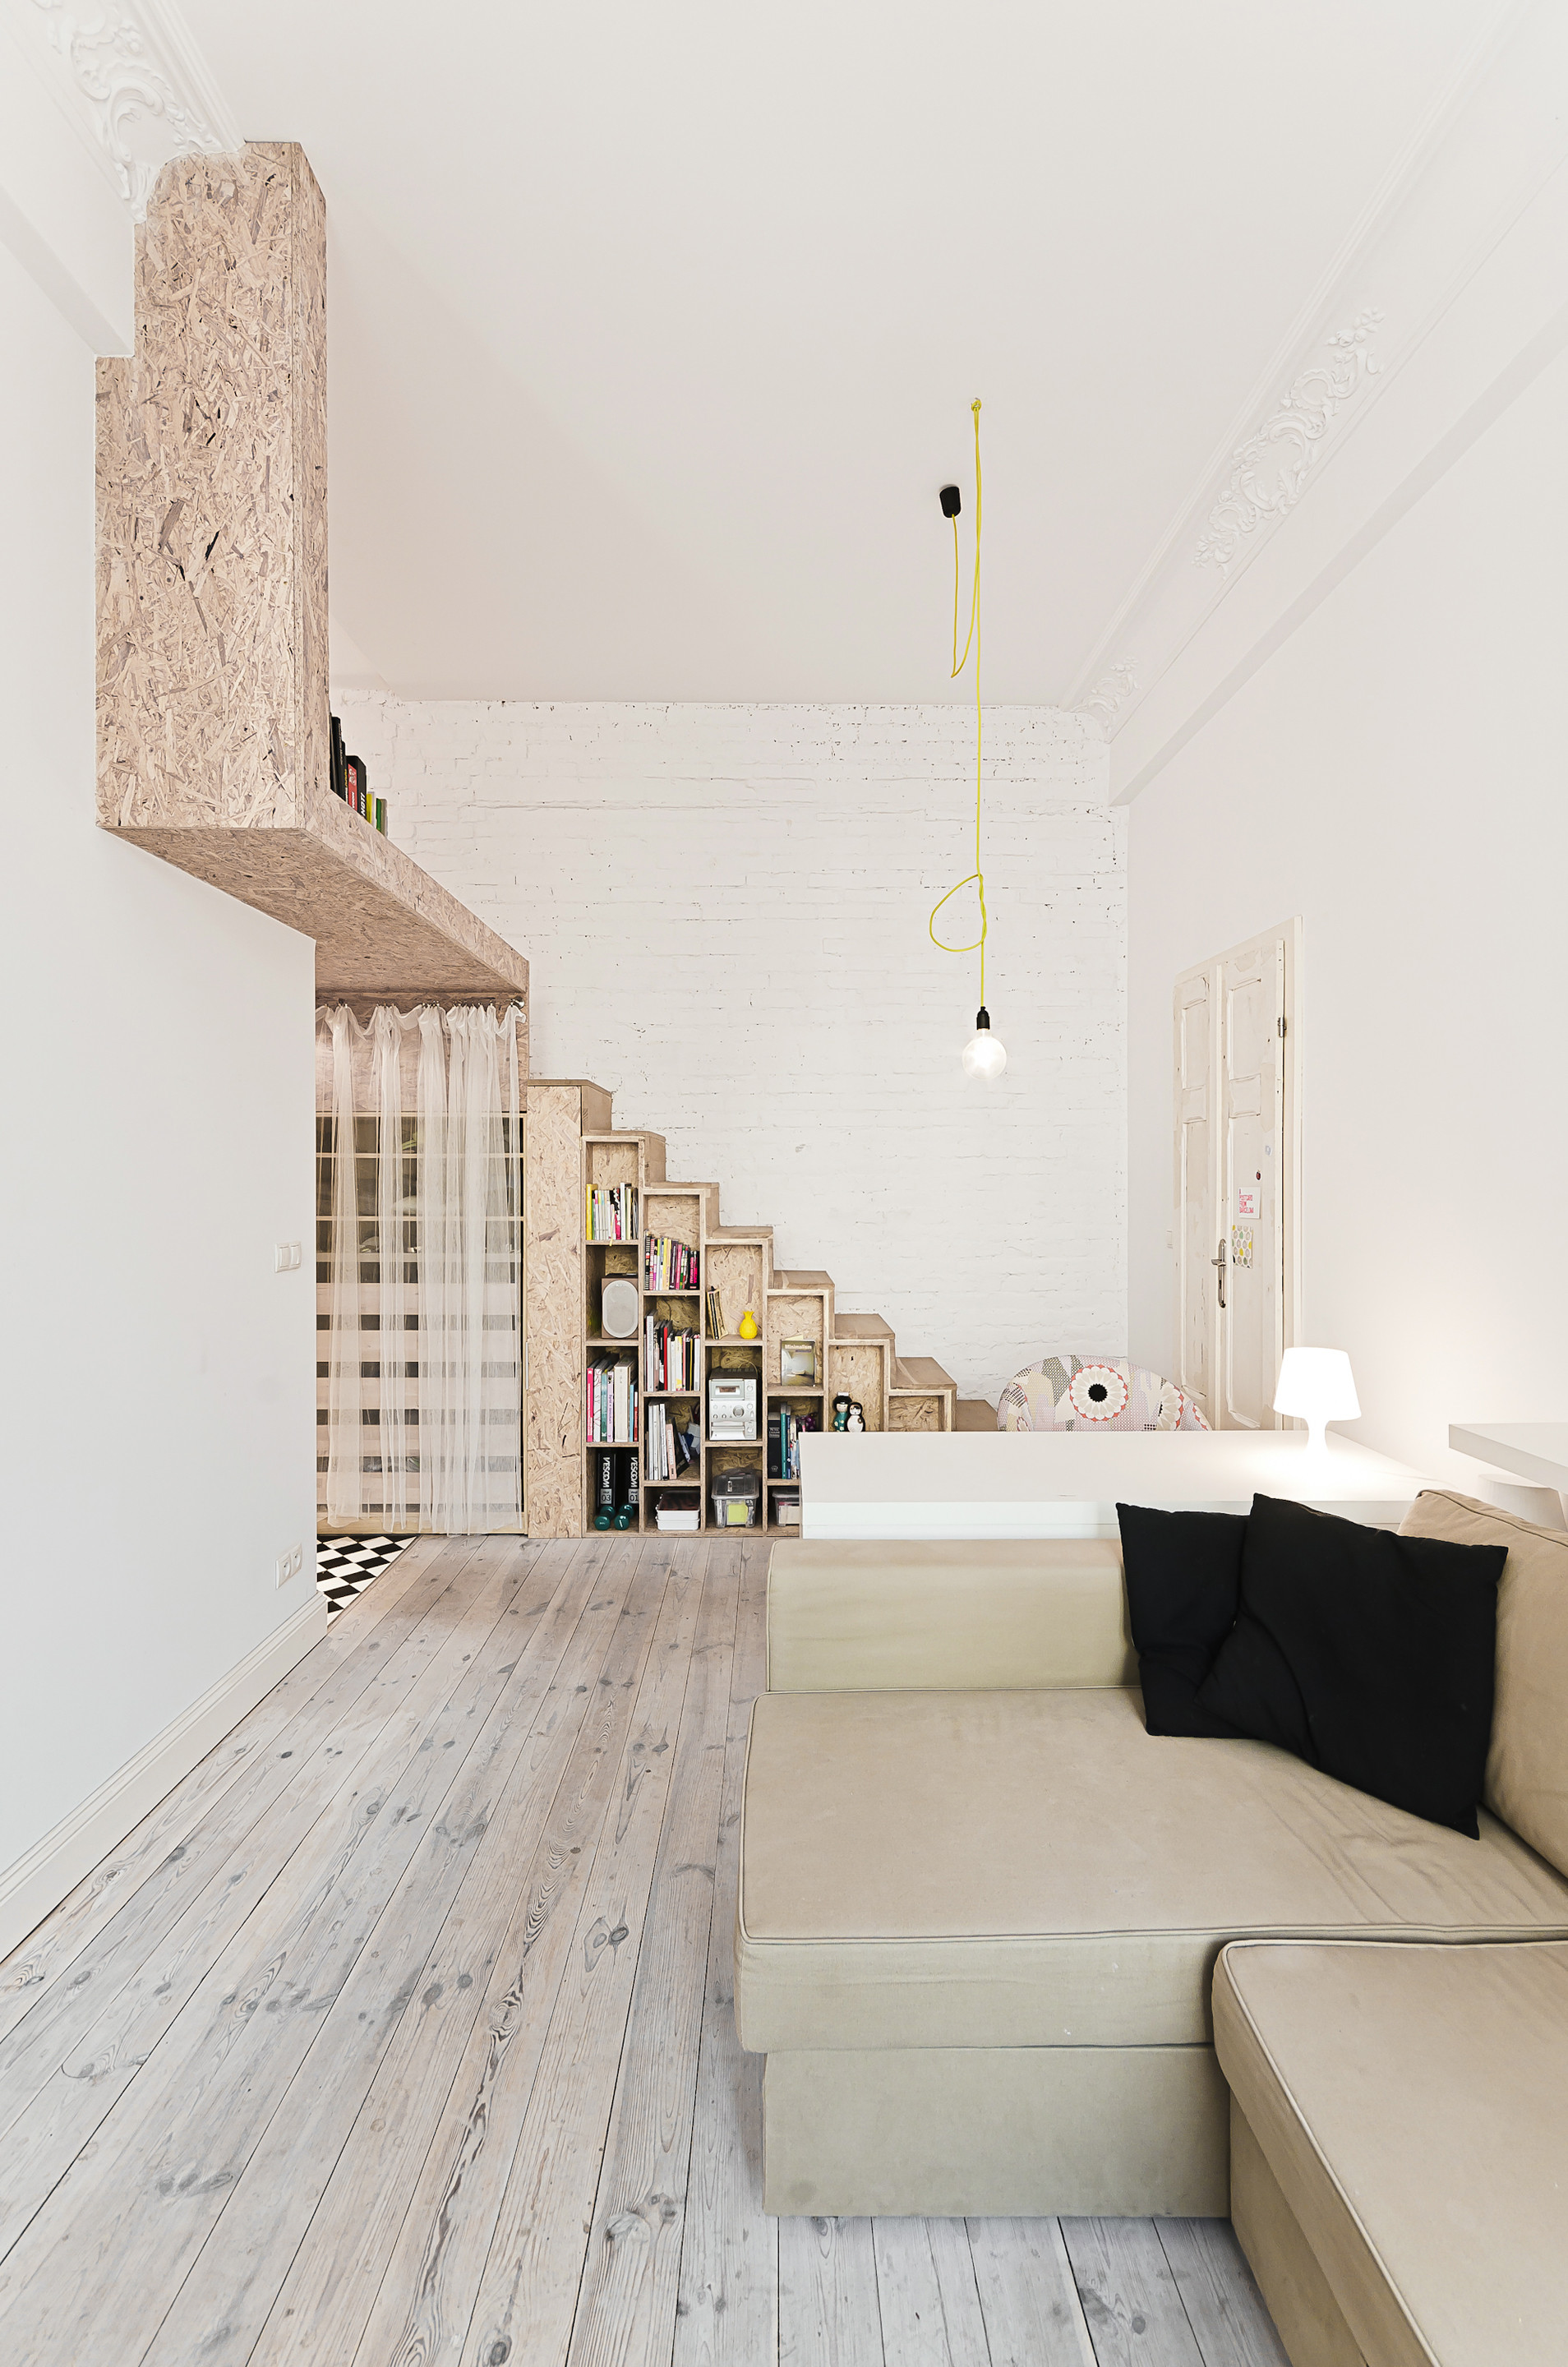 29 sqm 3xa 5 OSB Was Used To Build a Mezzanine in This Tiny 29m² Apartment